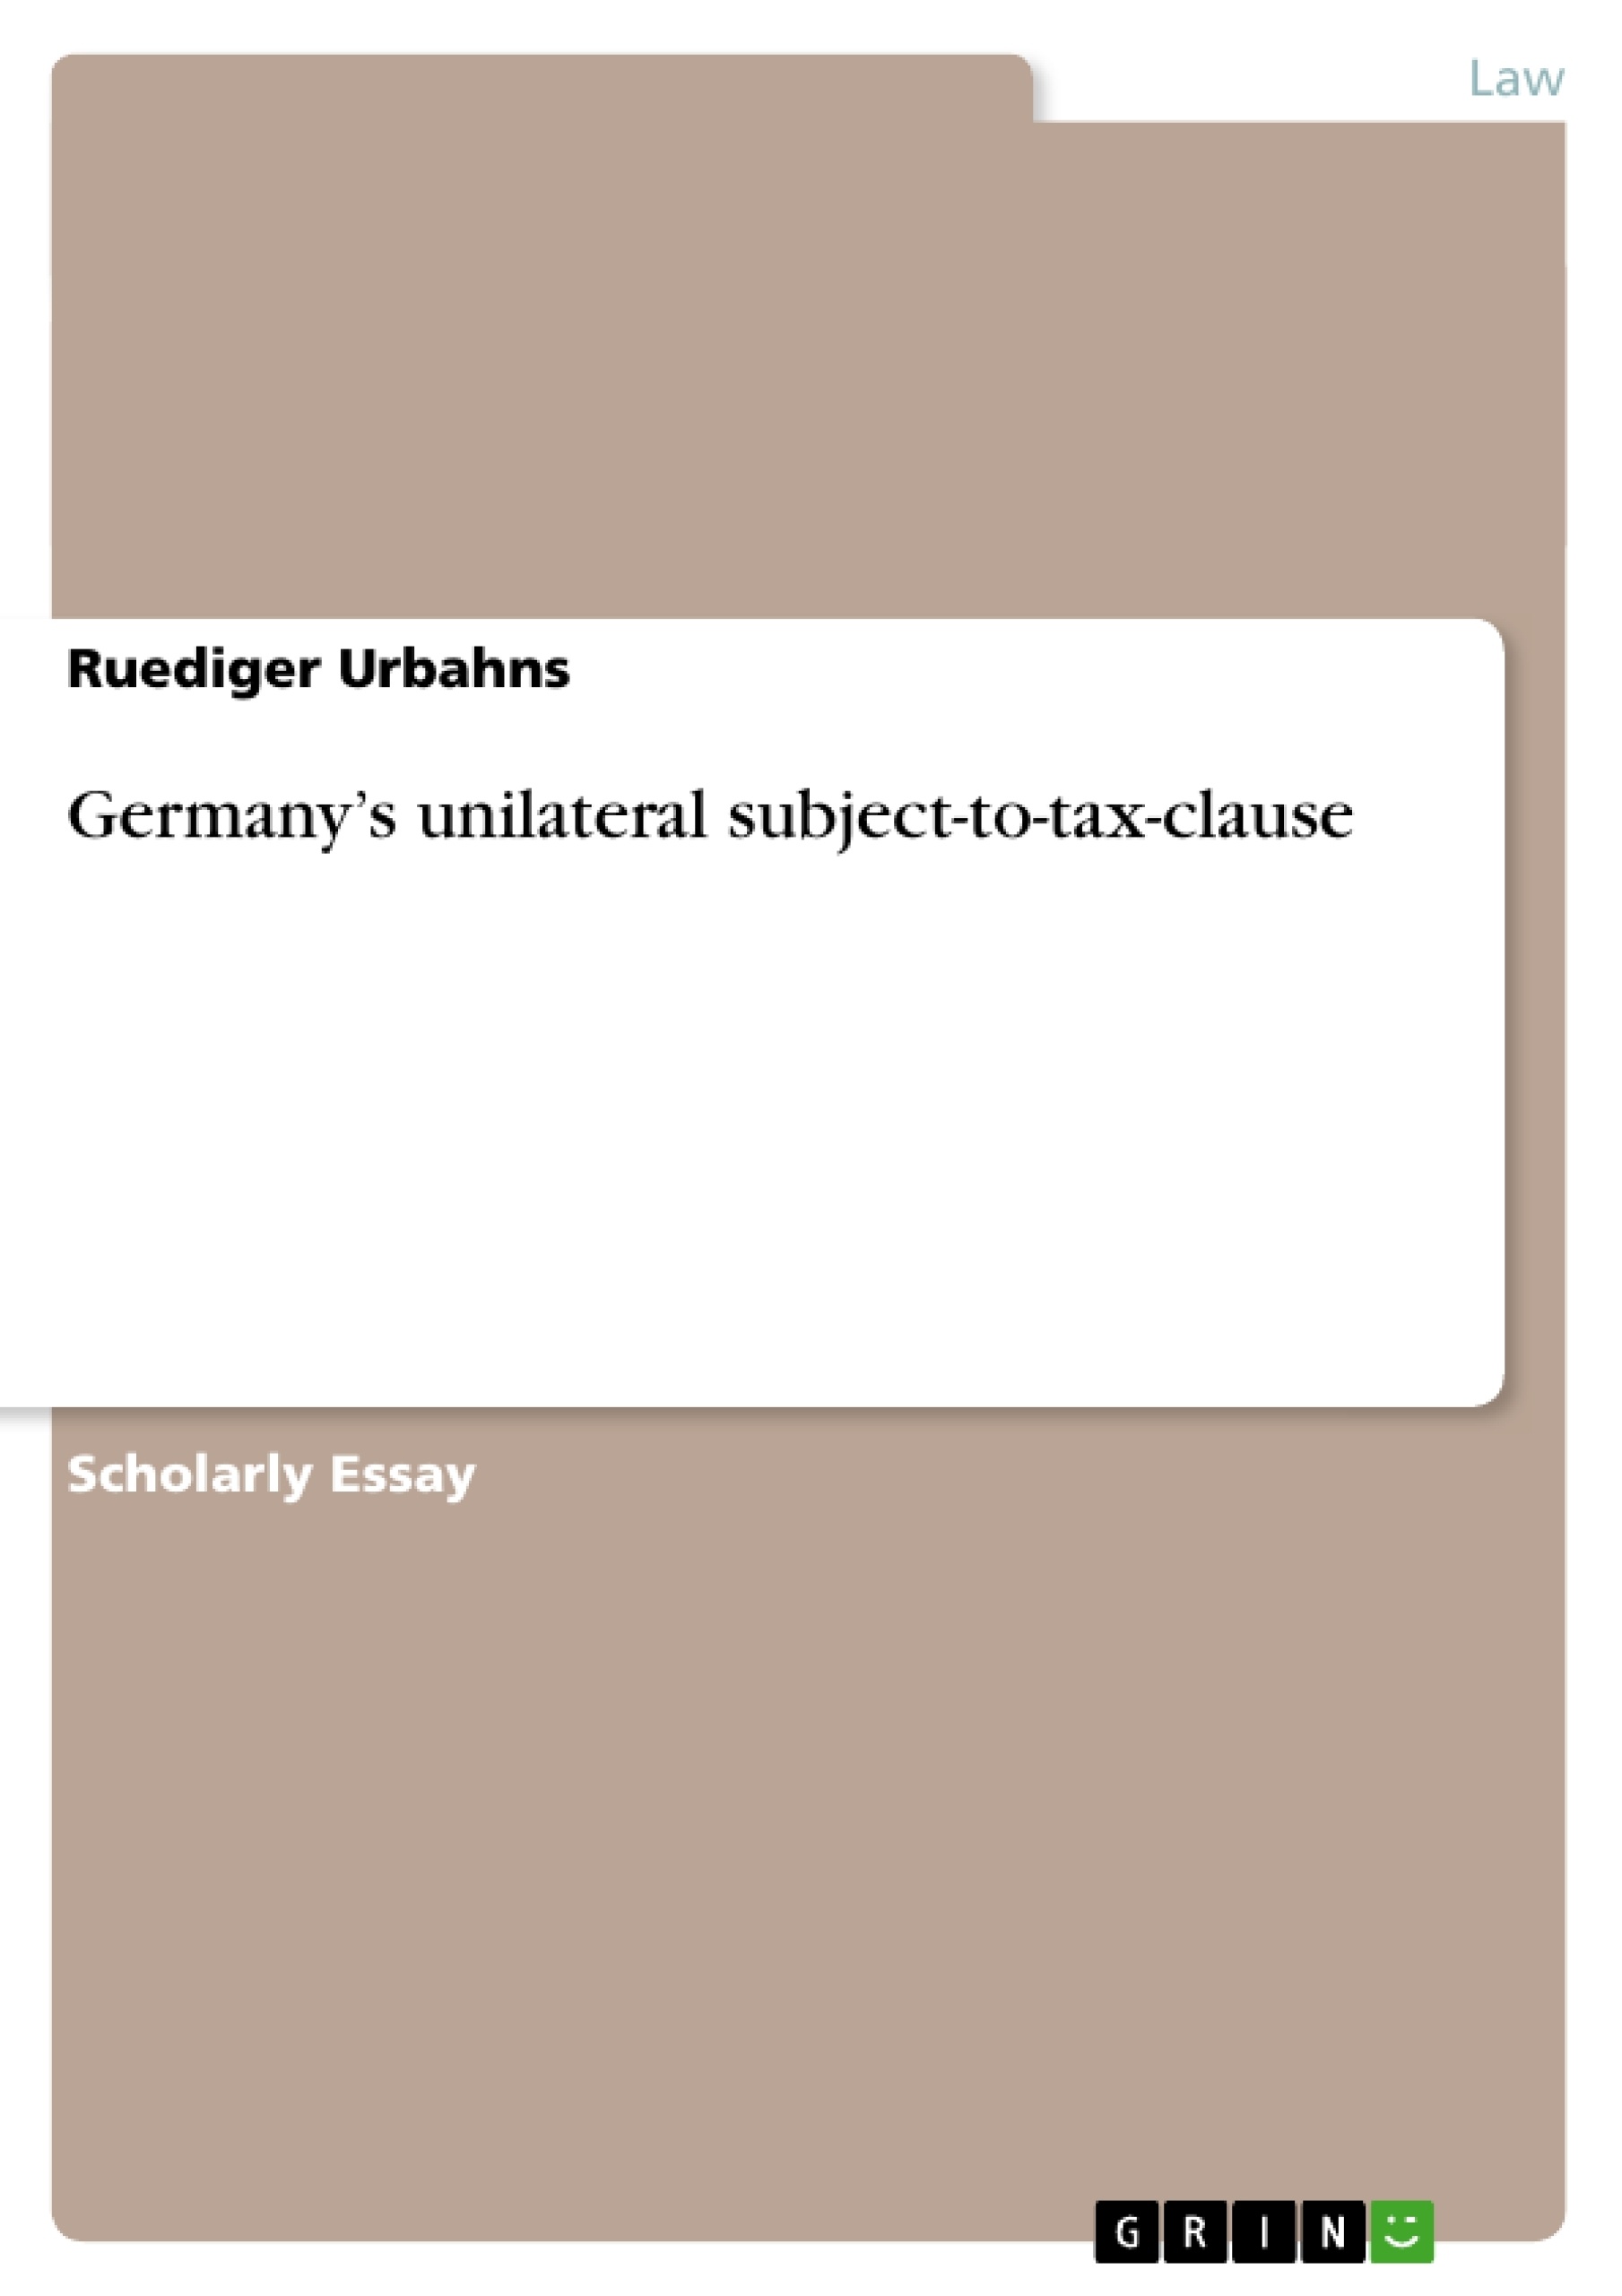 Title: Germany’s unilateral subject-to-tax-clause